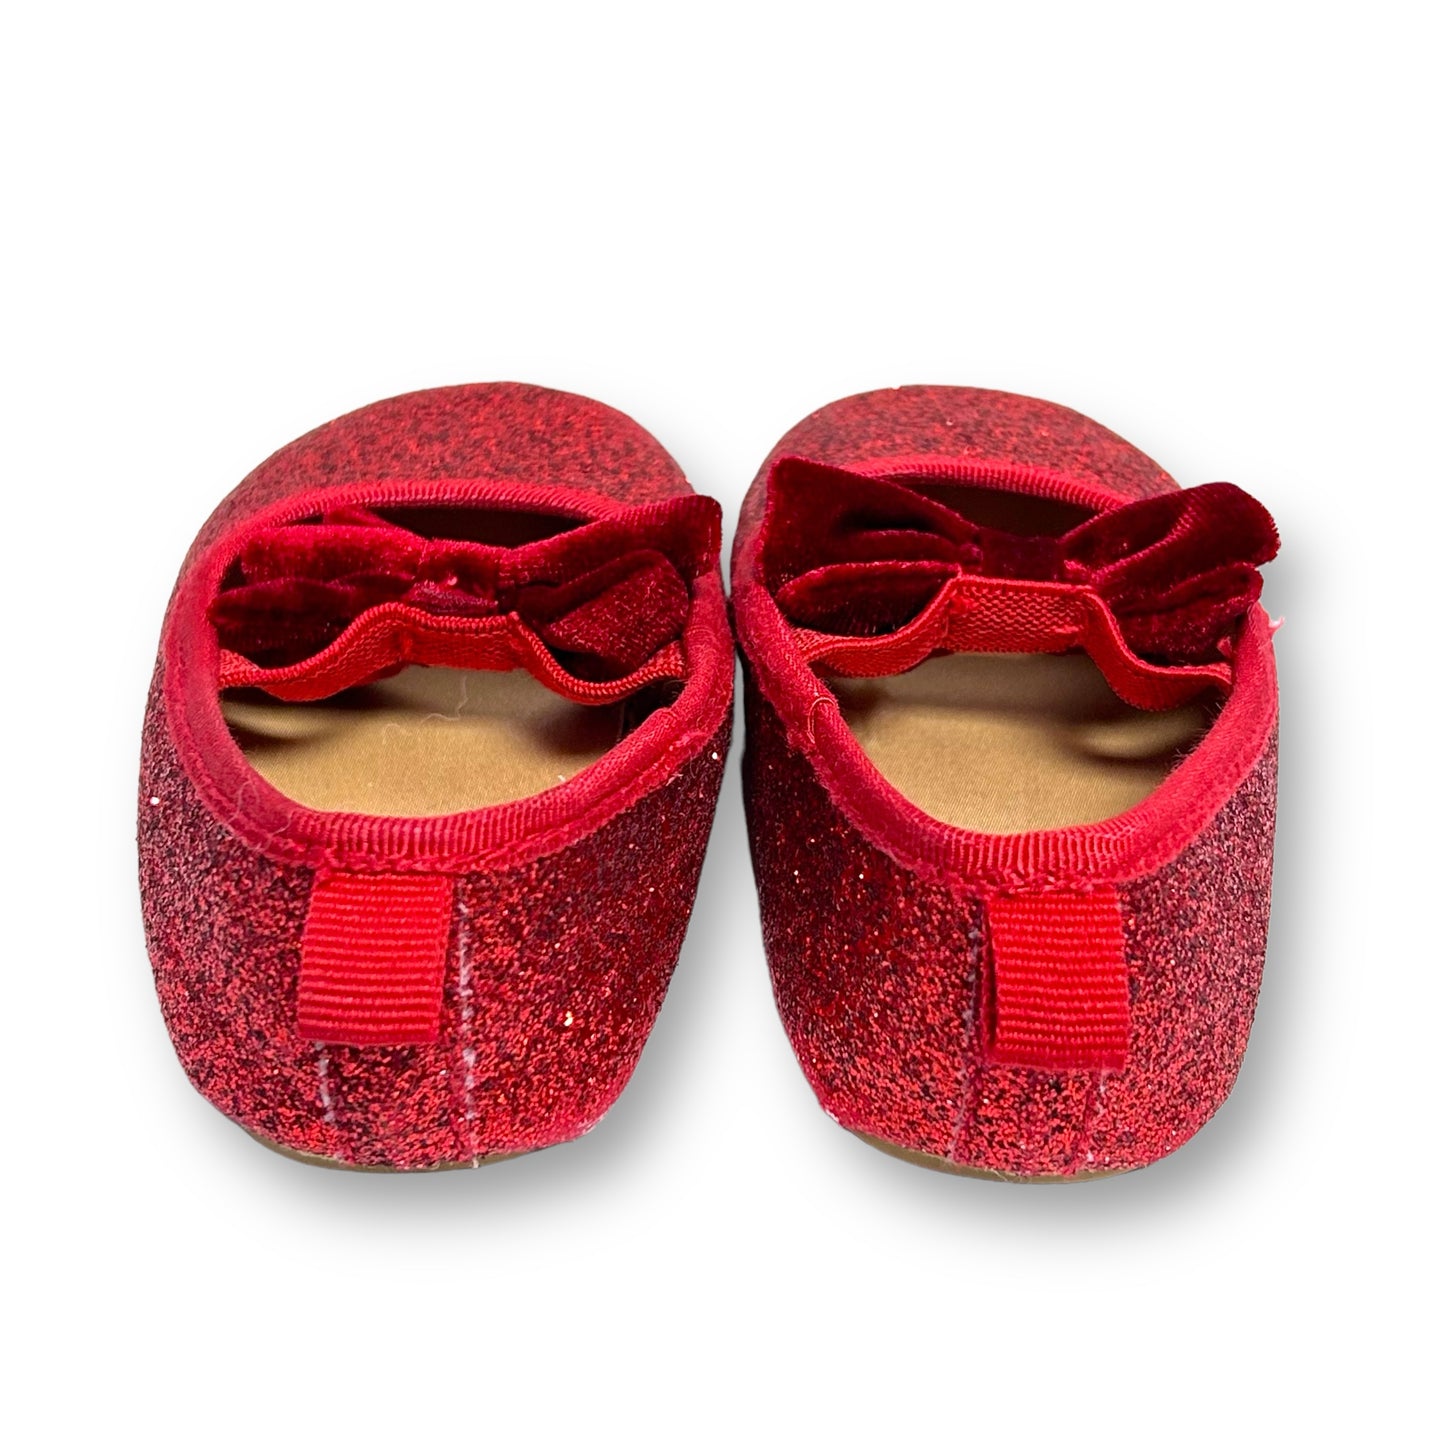 H&M Toddler Girl Size 5.5 Red Sparkle Flats Dress Shoes